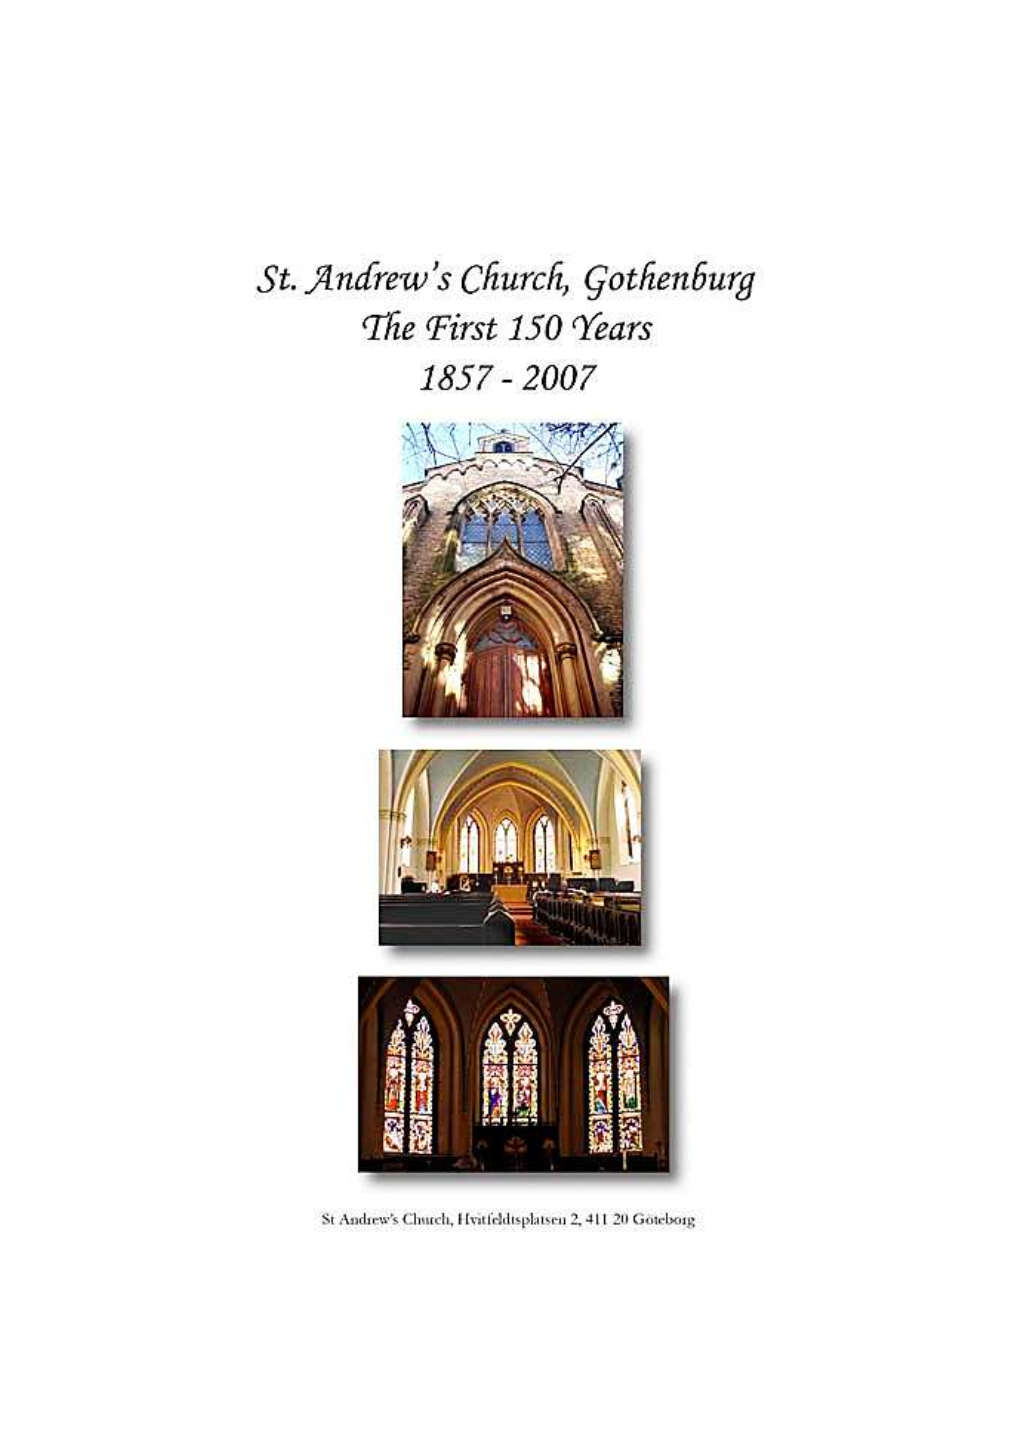 St Andrew's Church, Gothenburg: the First 150 Years